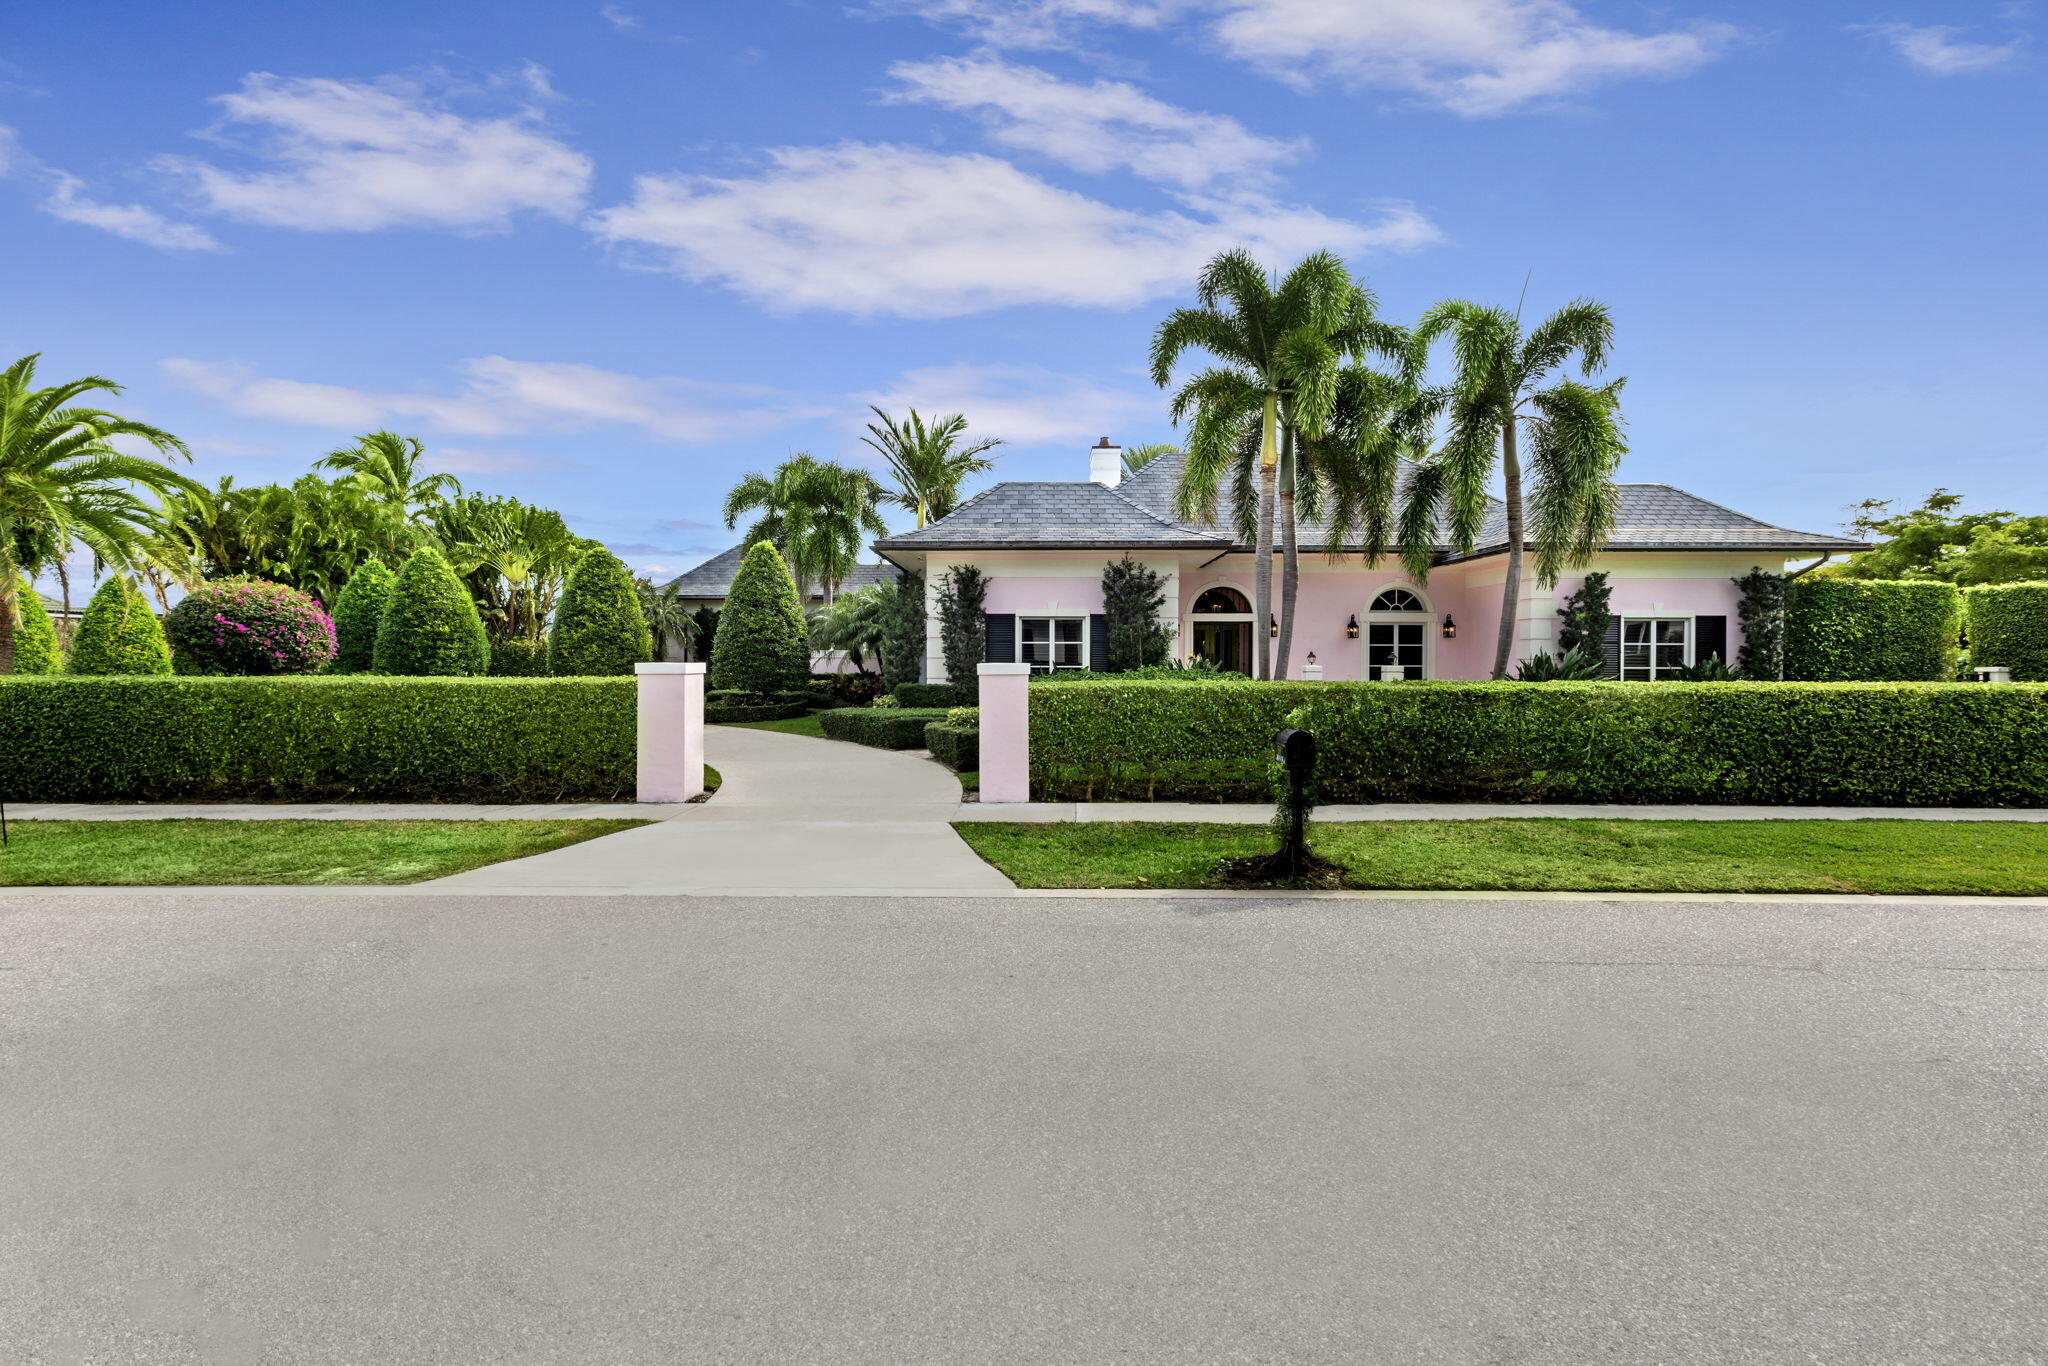 1500 Lands End Road, Manalapan, Palm Beach County, Florida - 4 Bedrooms  
4.5 Bathrooms - 